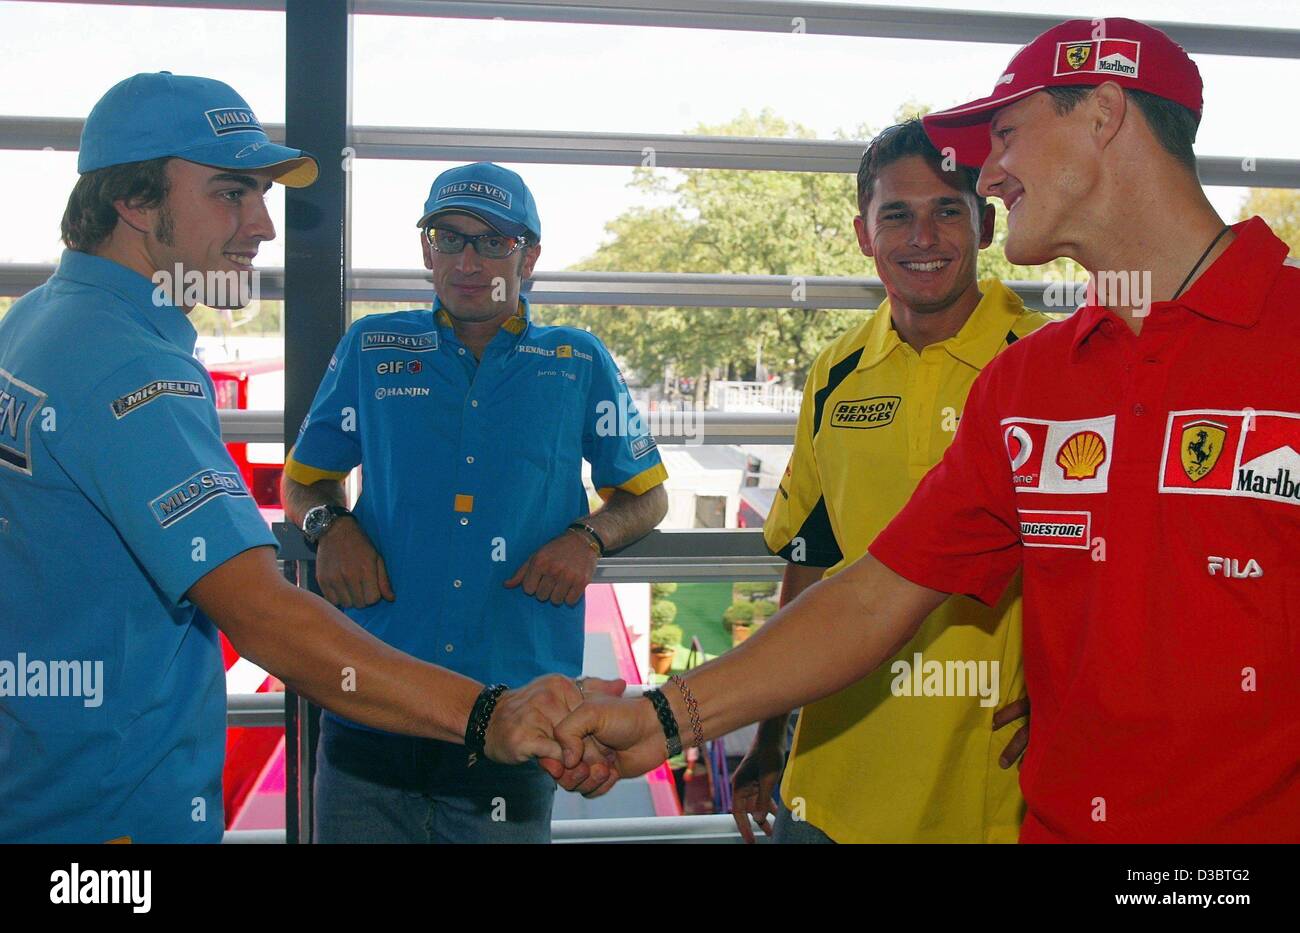 (dpa) - German formula one champion Michael Schumacher (R) of Ferrari and Spain's Fernando Alonso (L) of Renault shake hands while Italian formula one pilots Jarno Trulli of Renault (2nd from L) and Giancarlo Fisichella of Jordan-Ford look on, at the race track in Monza, Italy, 11 September 2003. Th Stock Photo